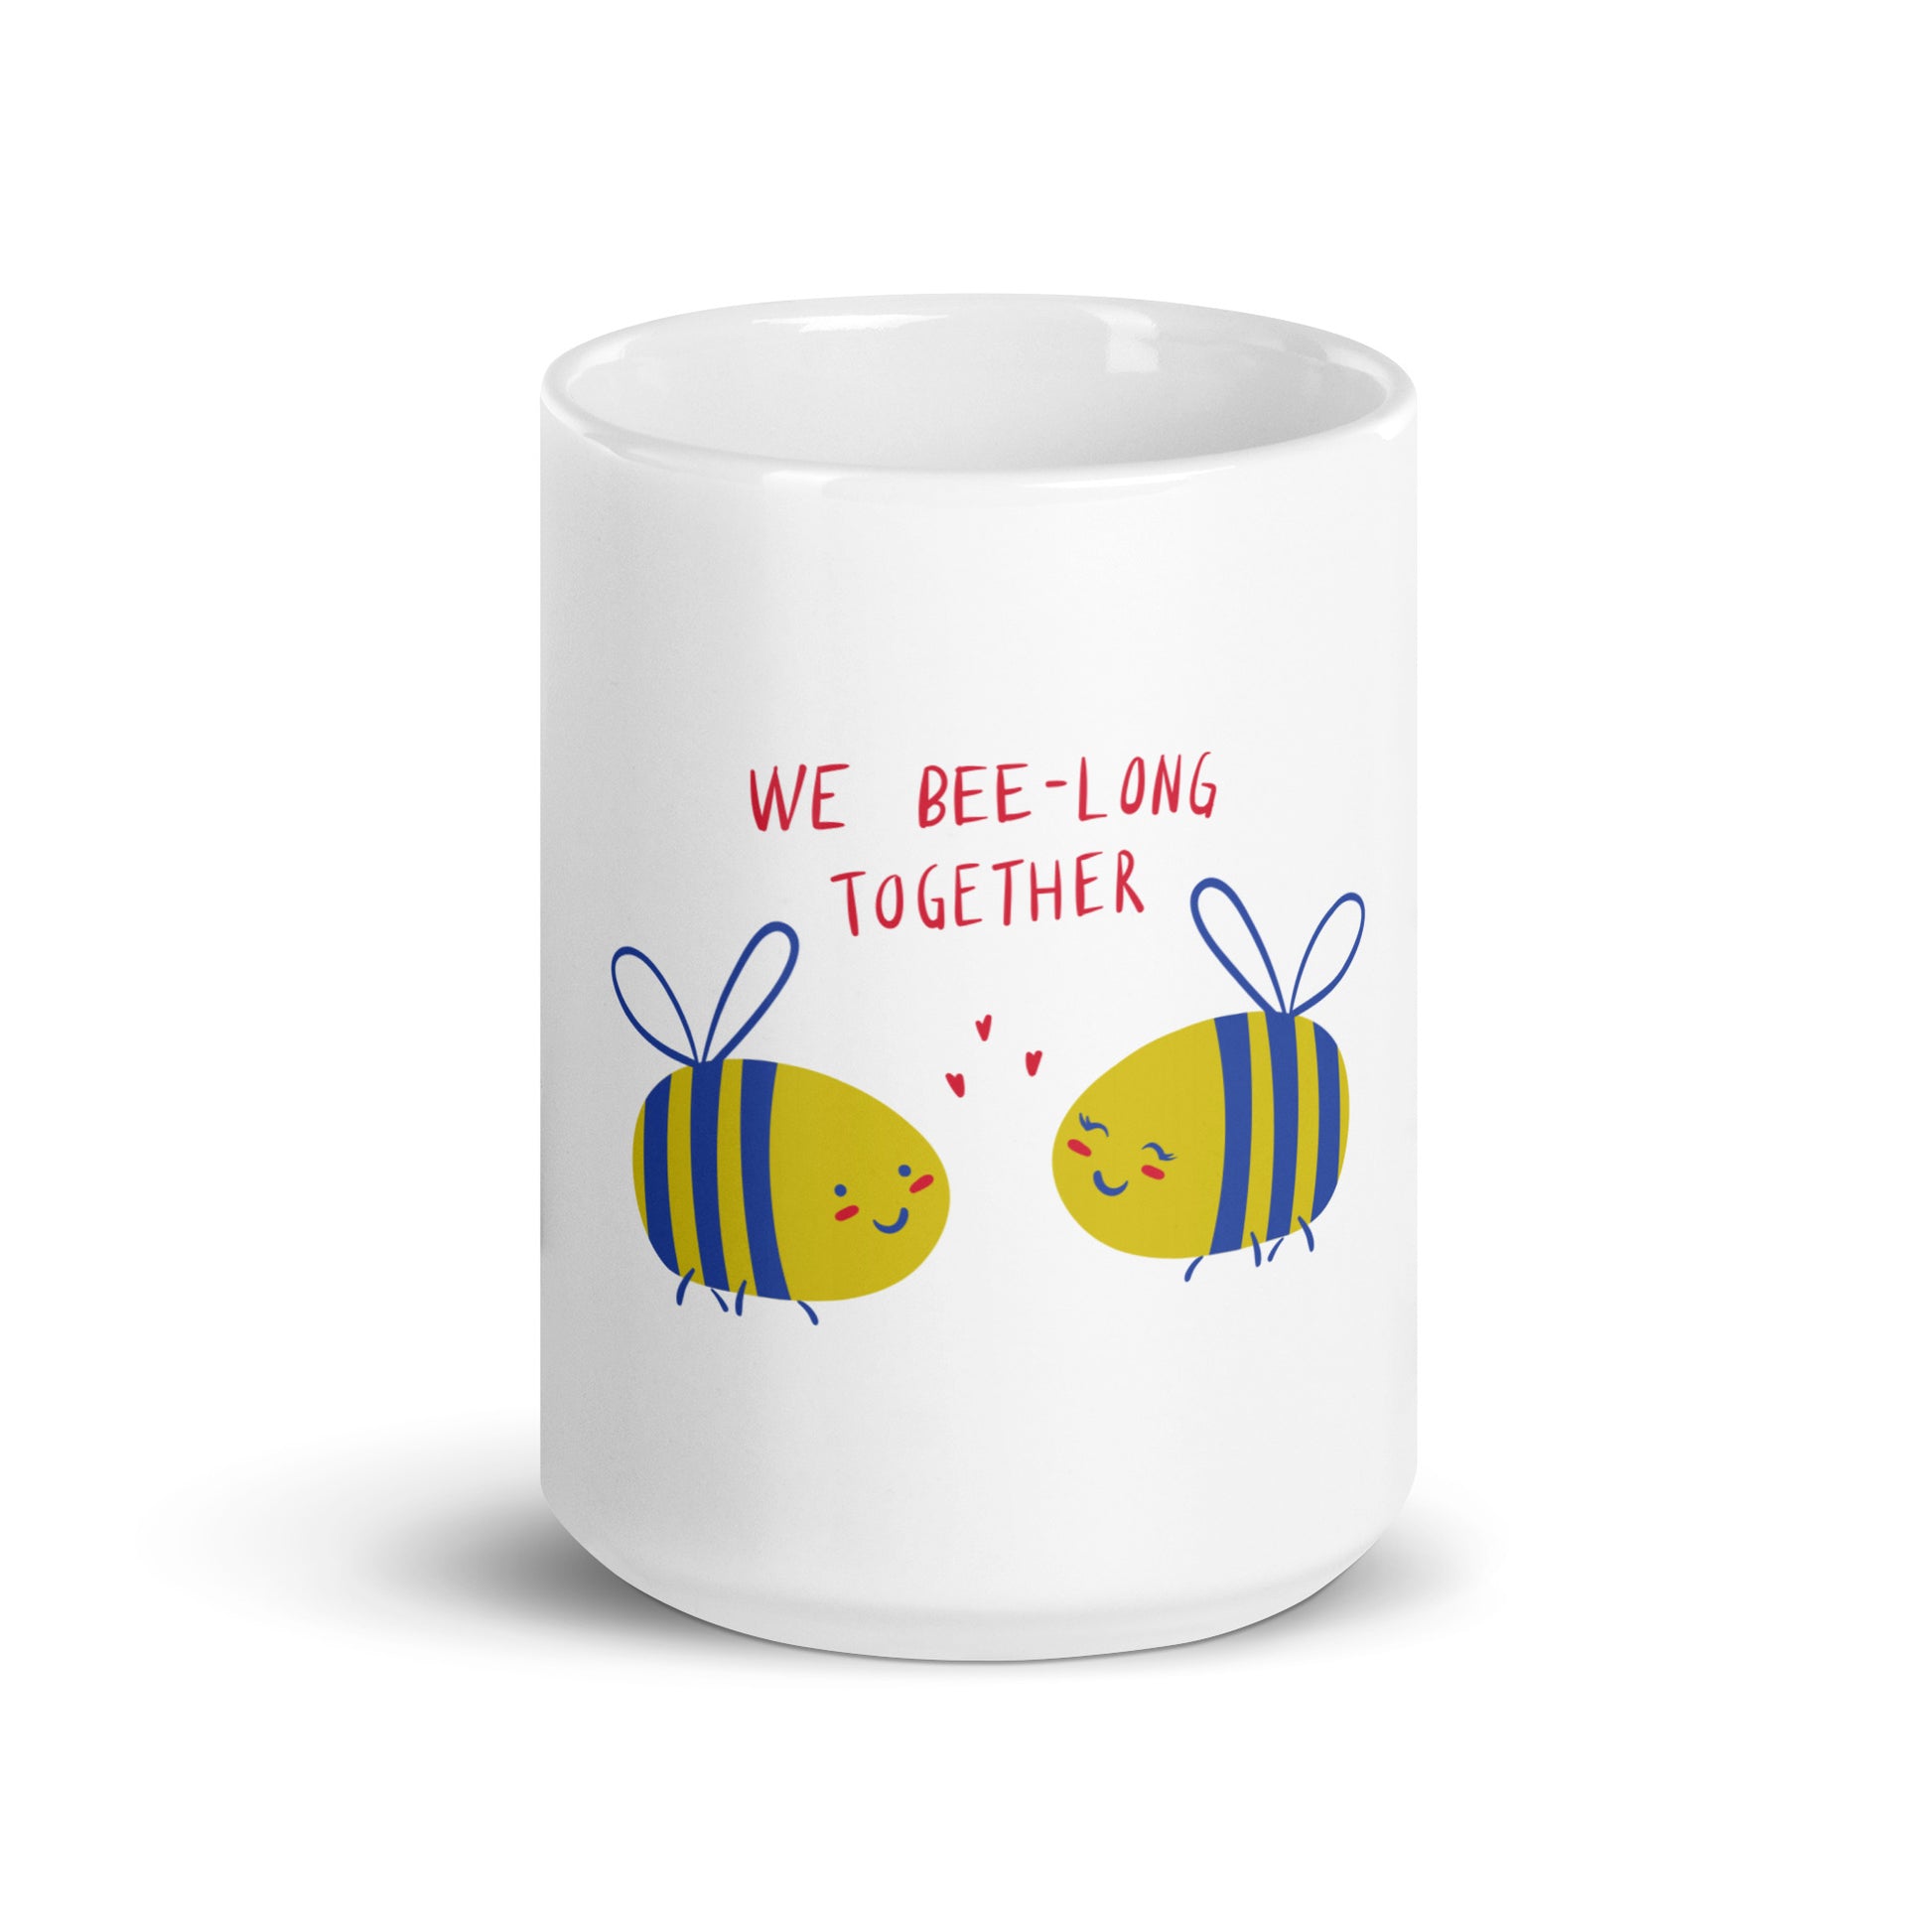 We Bee-Long Together - White Glossy Mug for Sweet Moments | Adorable Gift Choice